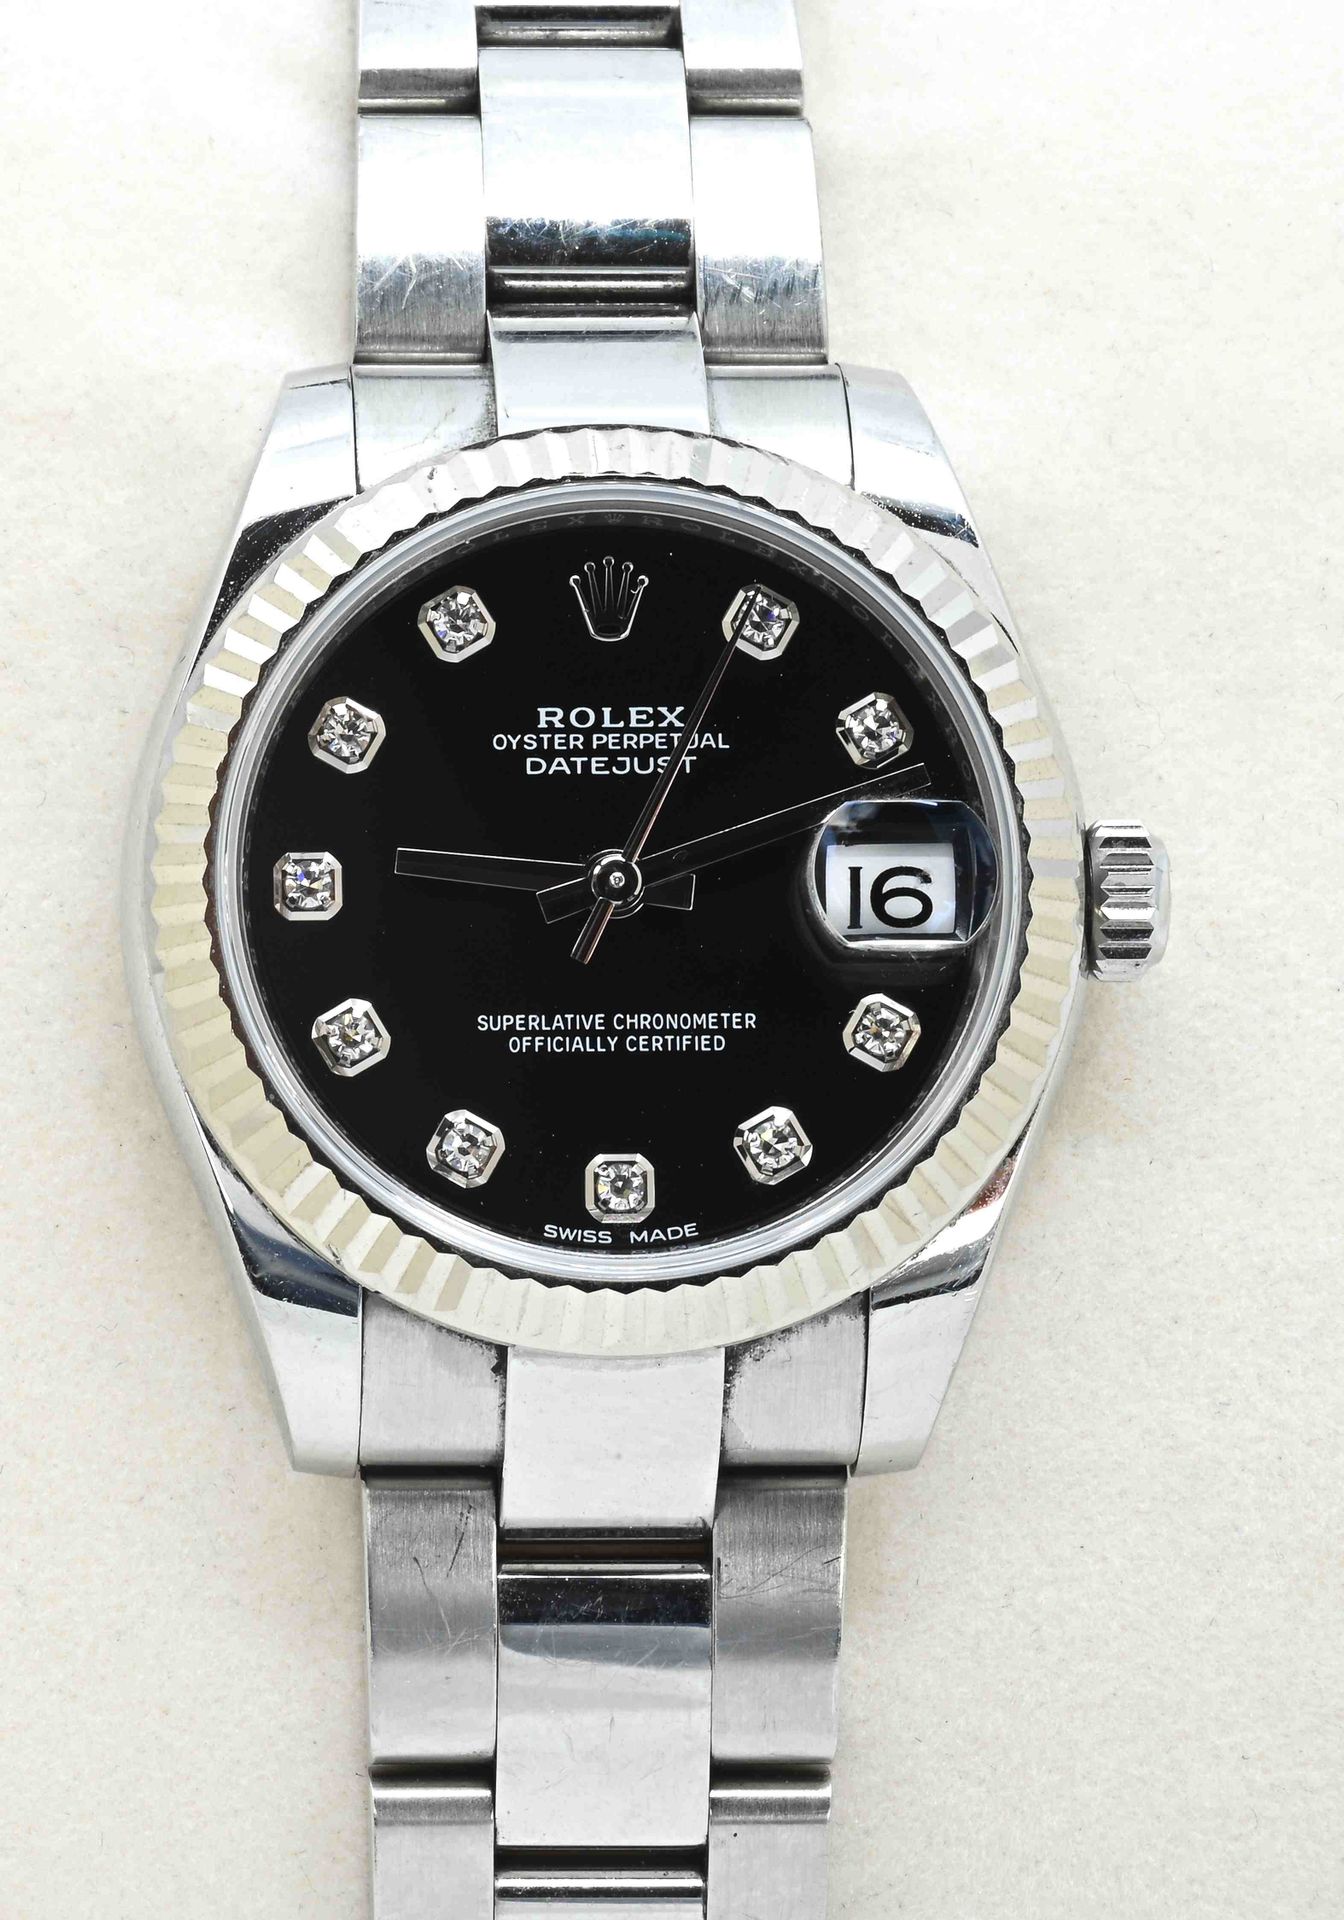 Null 
ROLEX. Lady OYSTER PERPETUAL DATE JUST 31 mm. N° de série : 57MO5746. 

Bo&hellip;